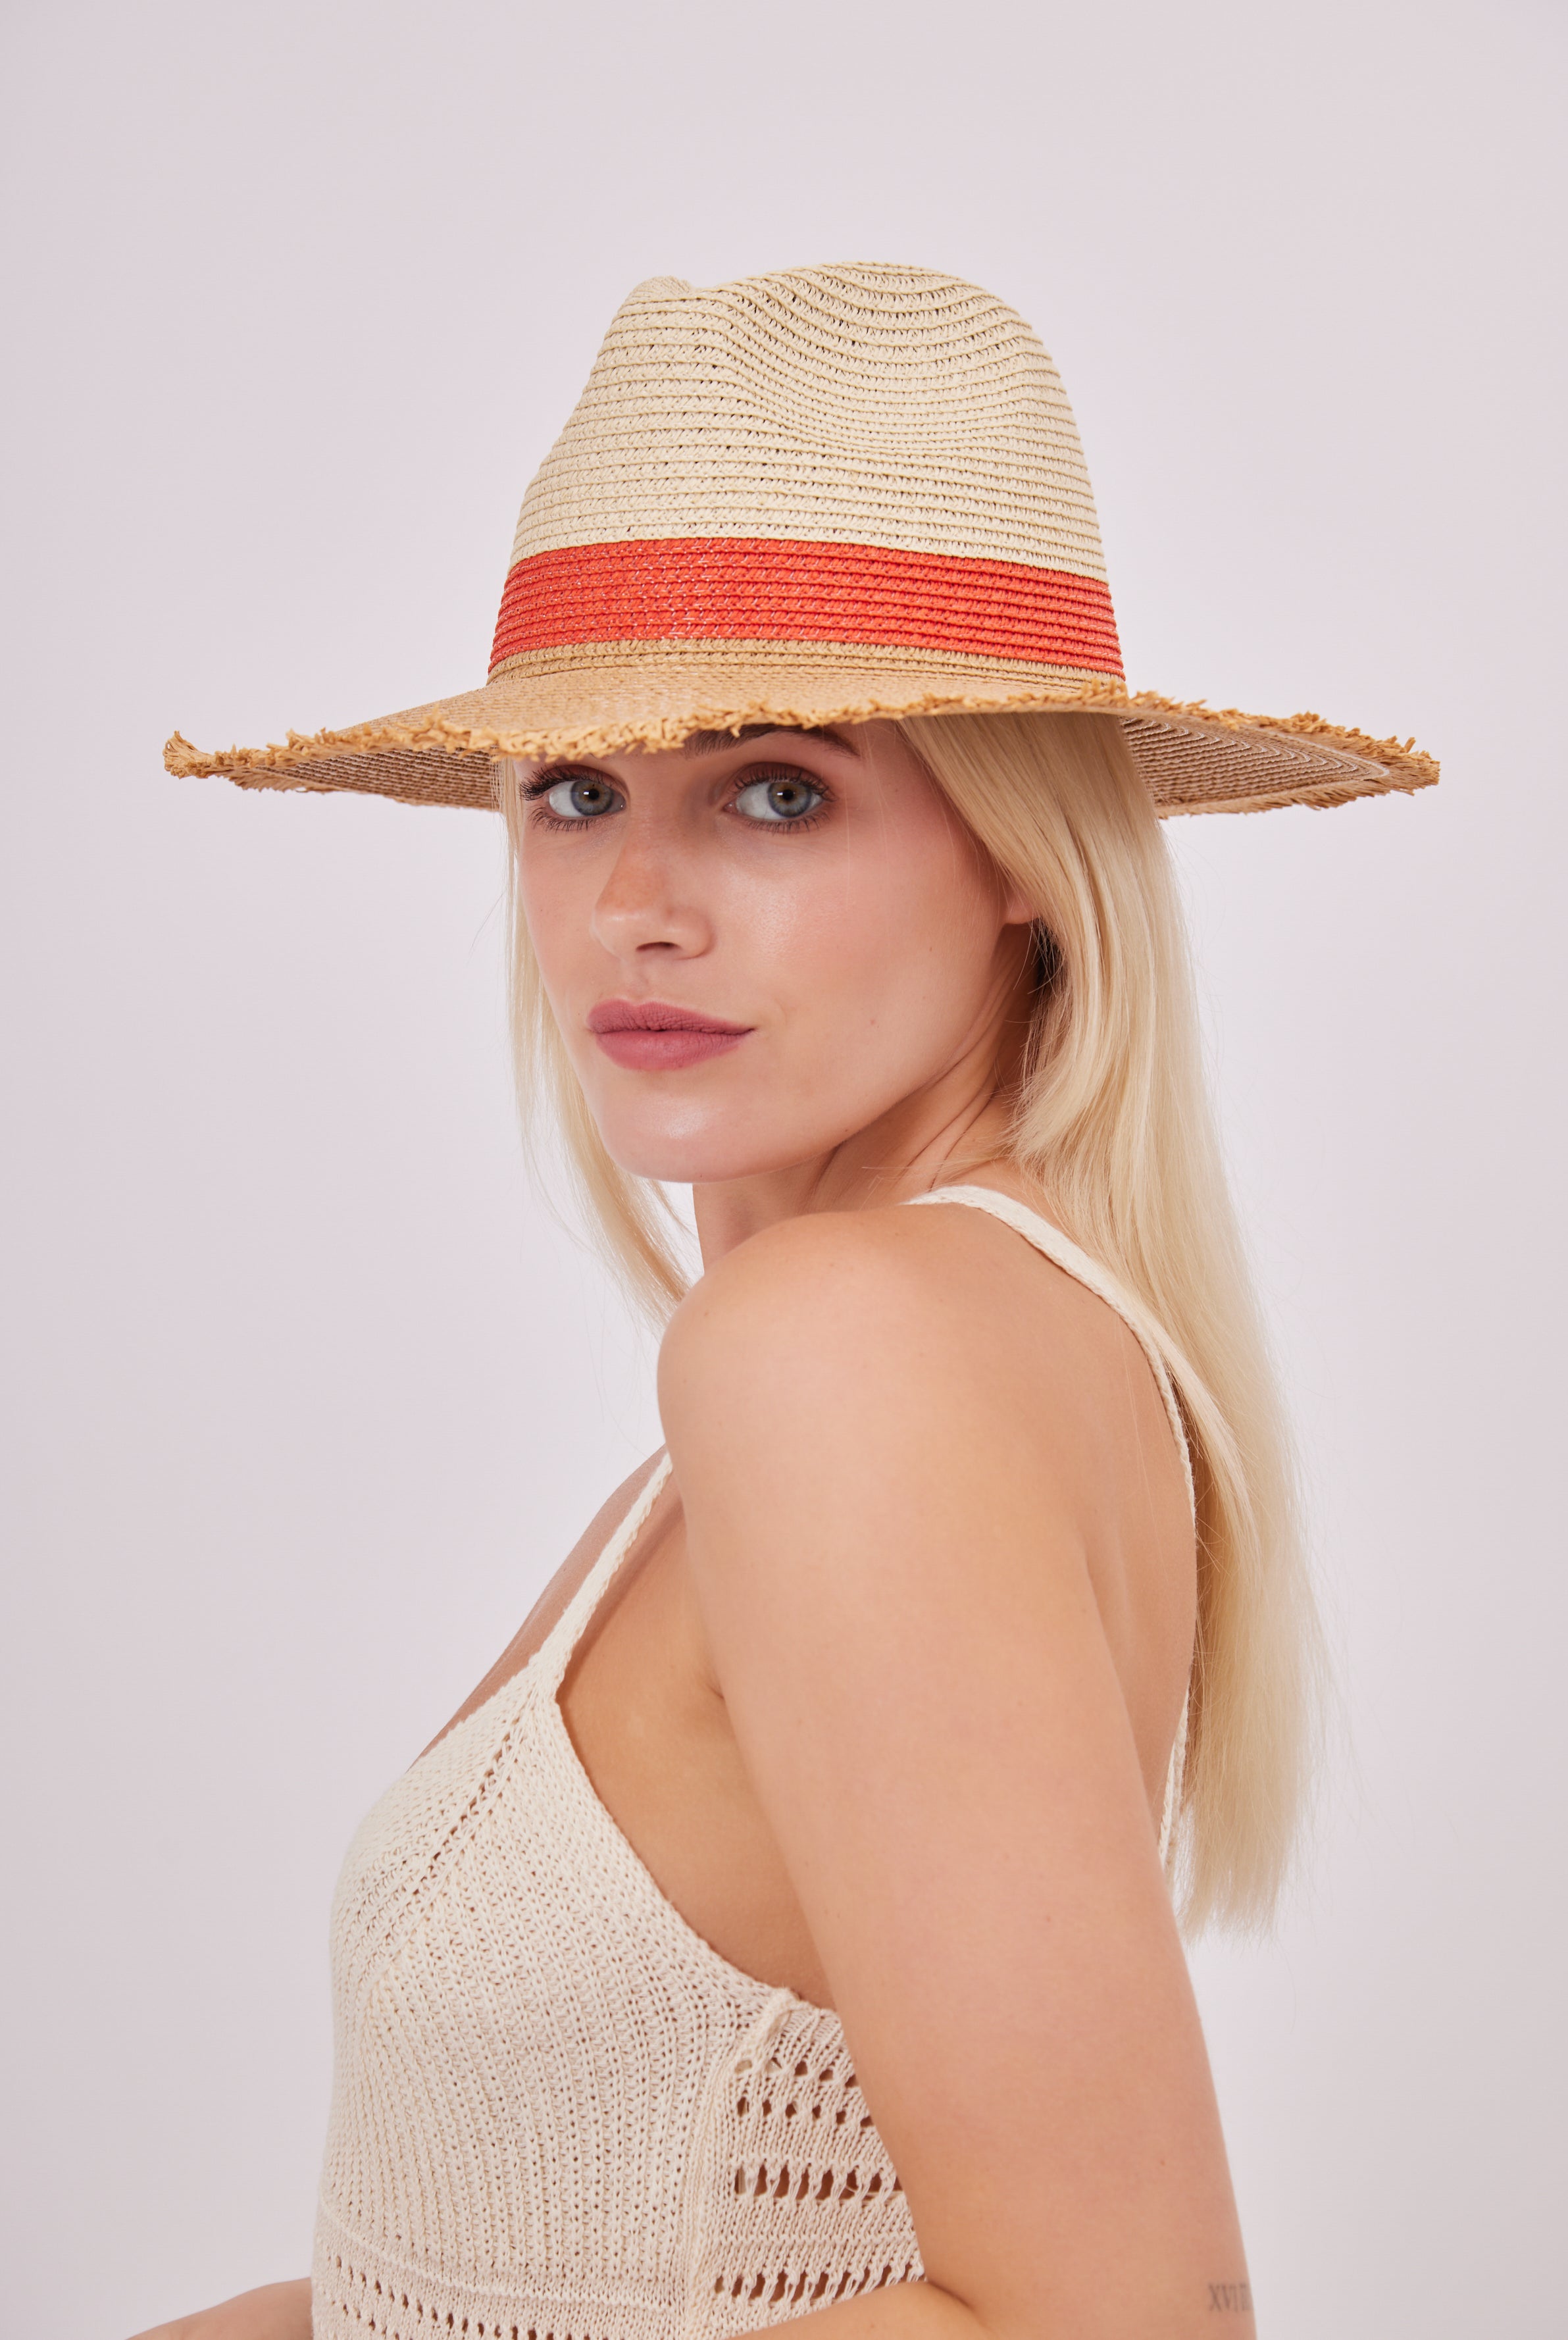 Contrast Straw Fedora with Frayed Edge in Multicoloured | straw hat | beach hat | fedora hat | fedora | women's hat | women's hats | frayed hat | frayed edge accessories | women's accessories | women's hat | two tone hat | beach hat | summer hat | holiday hat | festival hat | city break accessories | tomato girl accessories | tomato girl hat | hats | hat